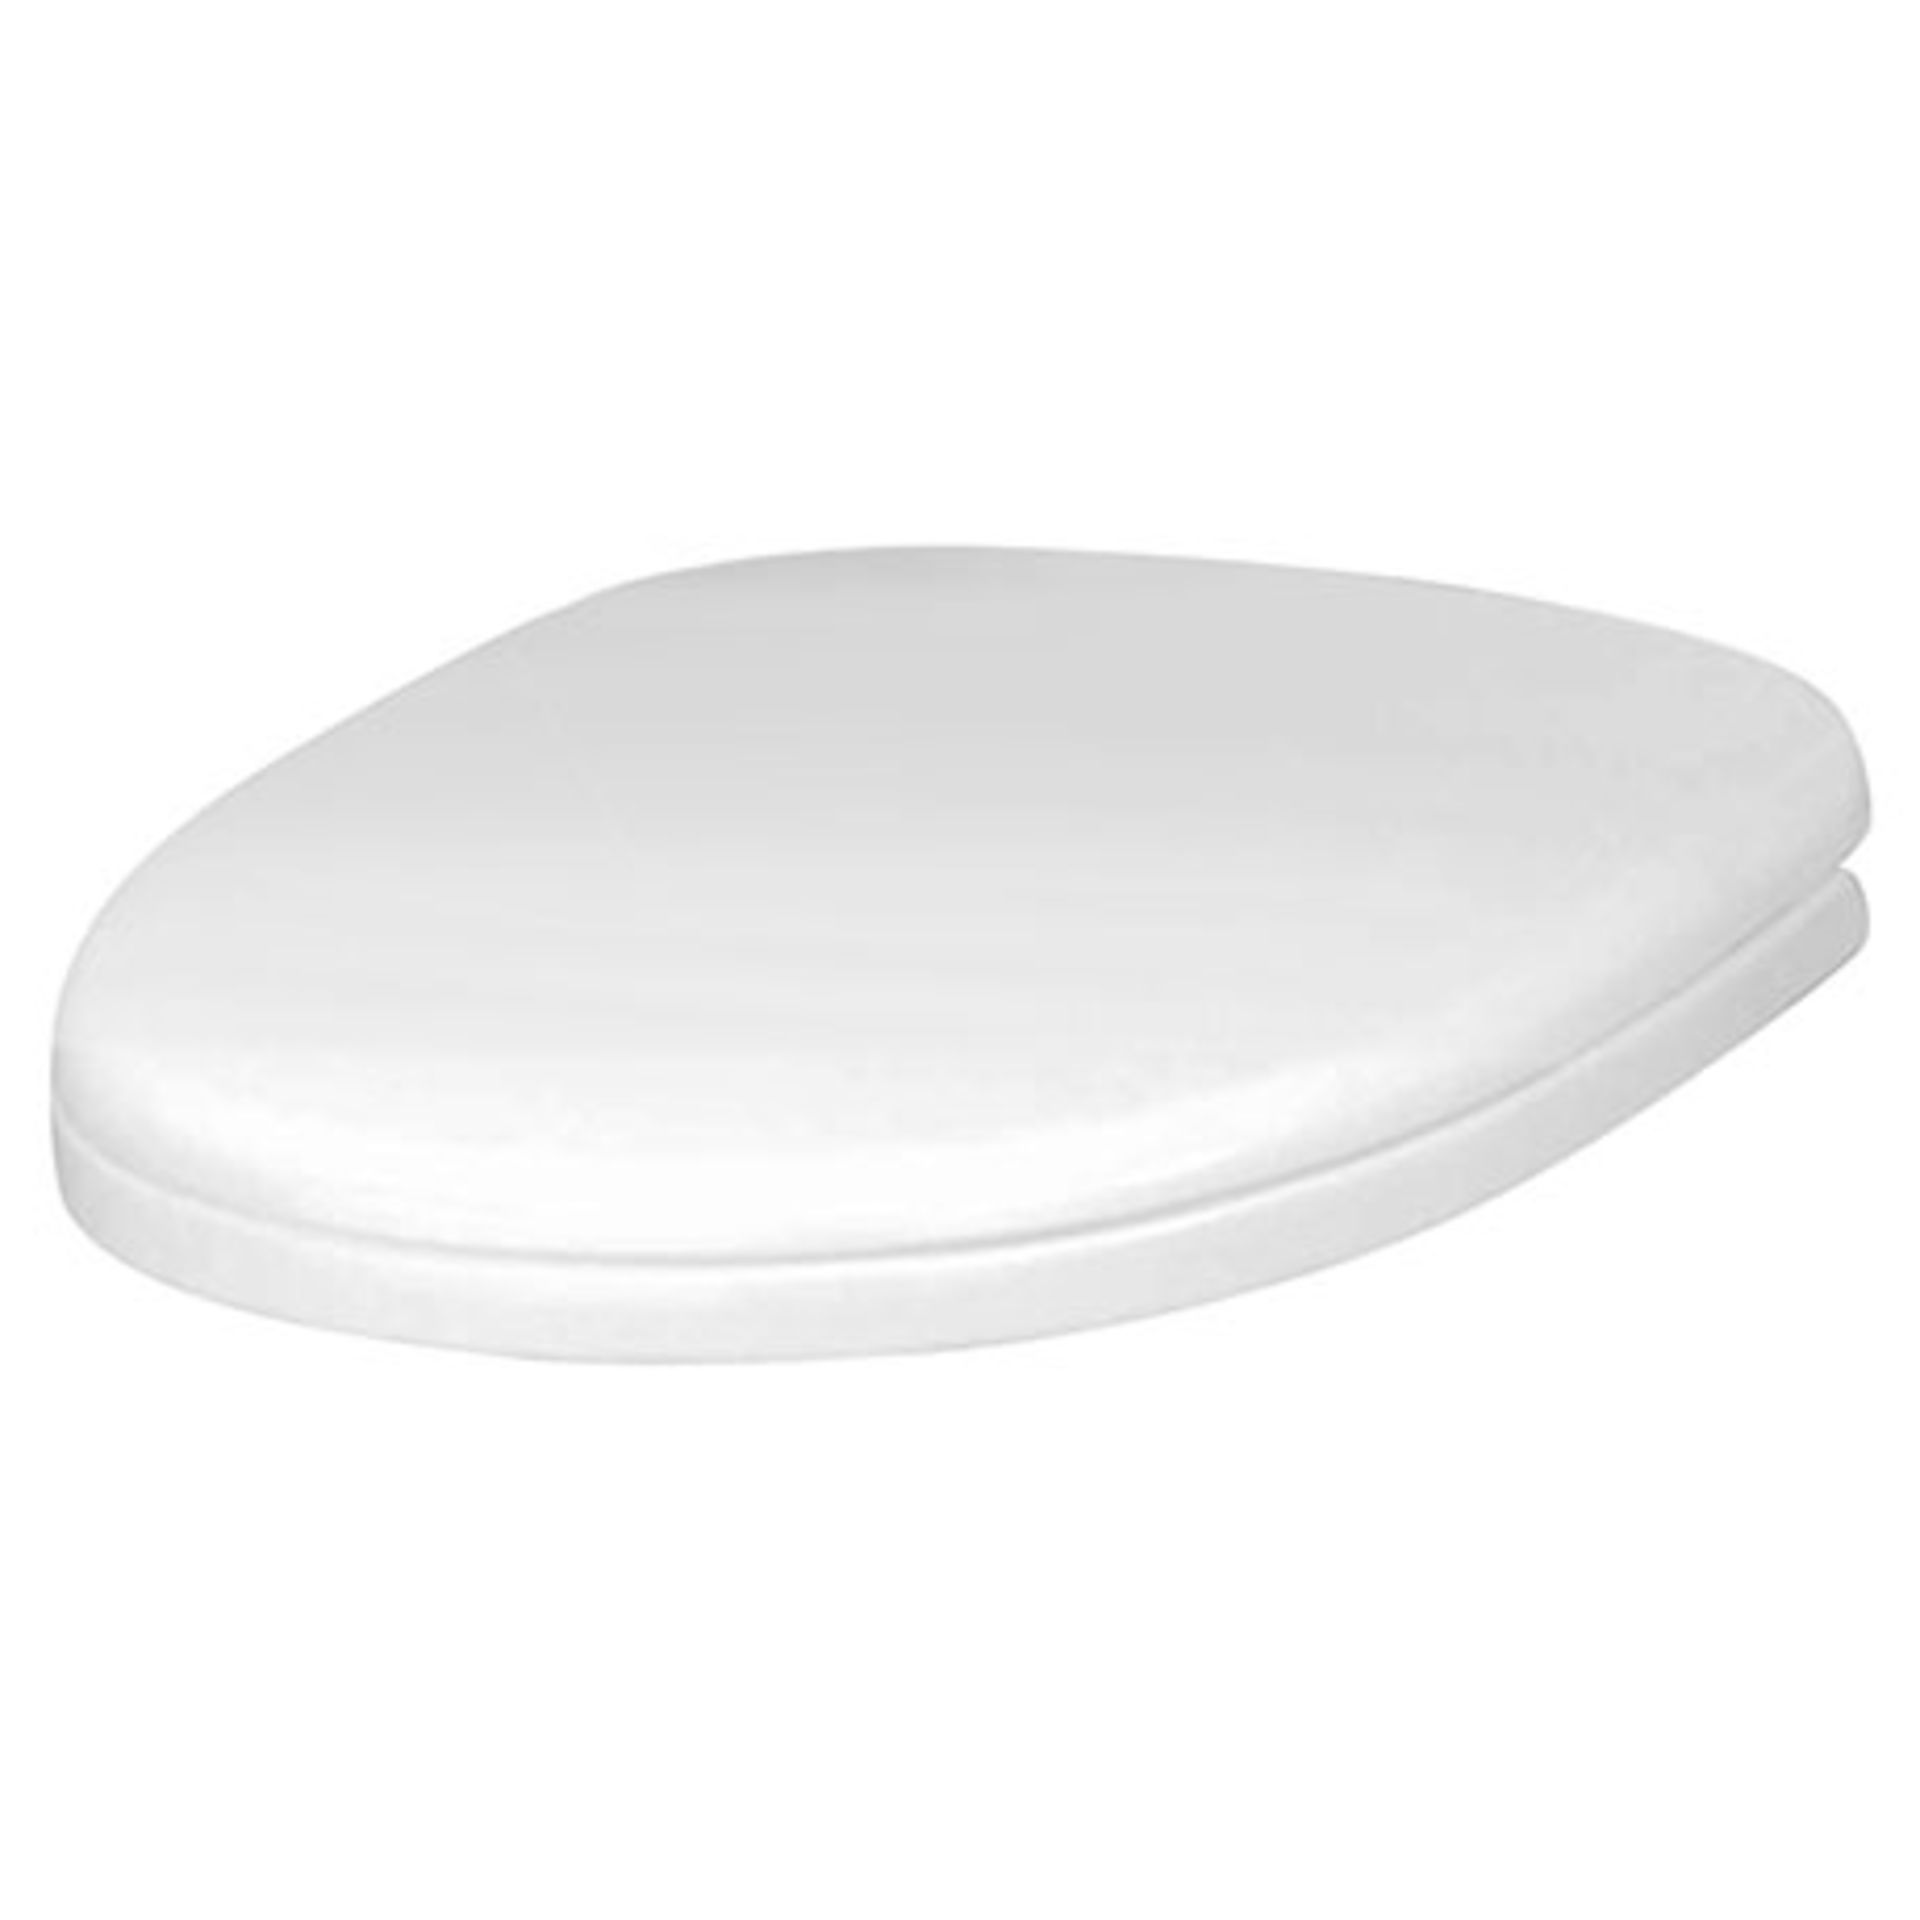 MBJSA0026 BACAN SOFT CLOSE TOILET SEAT C4302G - Image 2 of 2